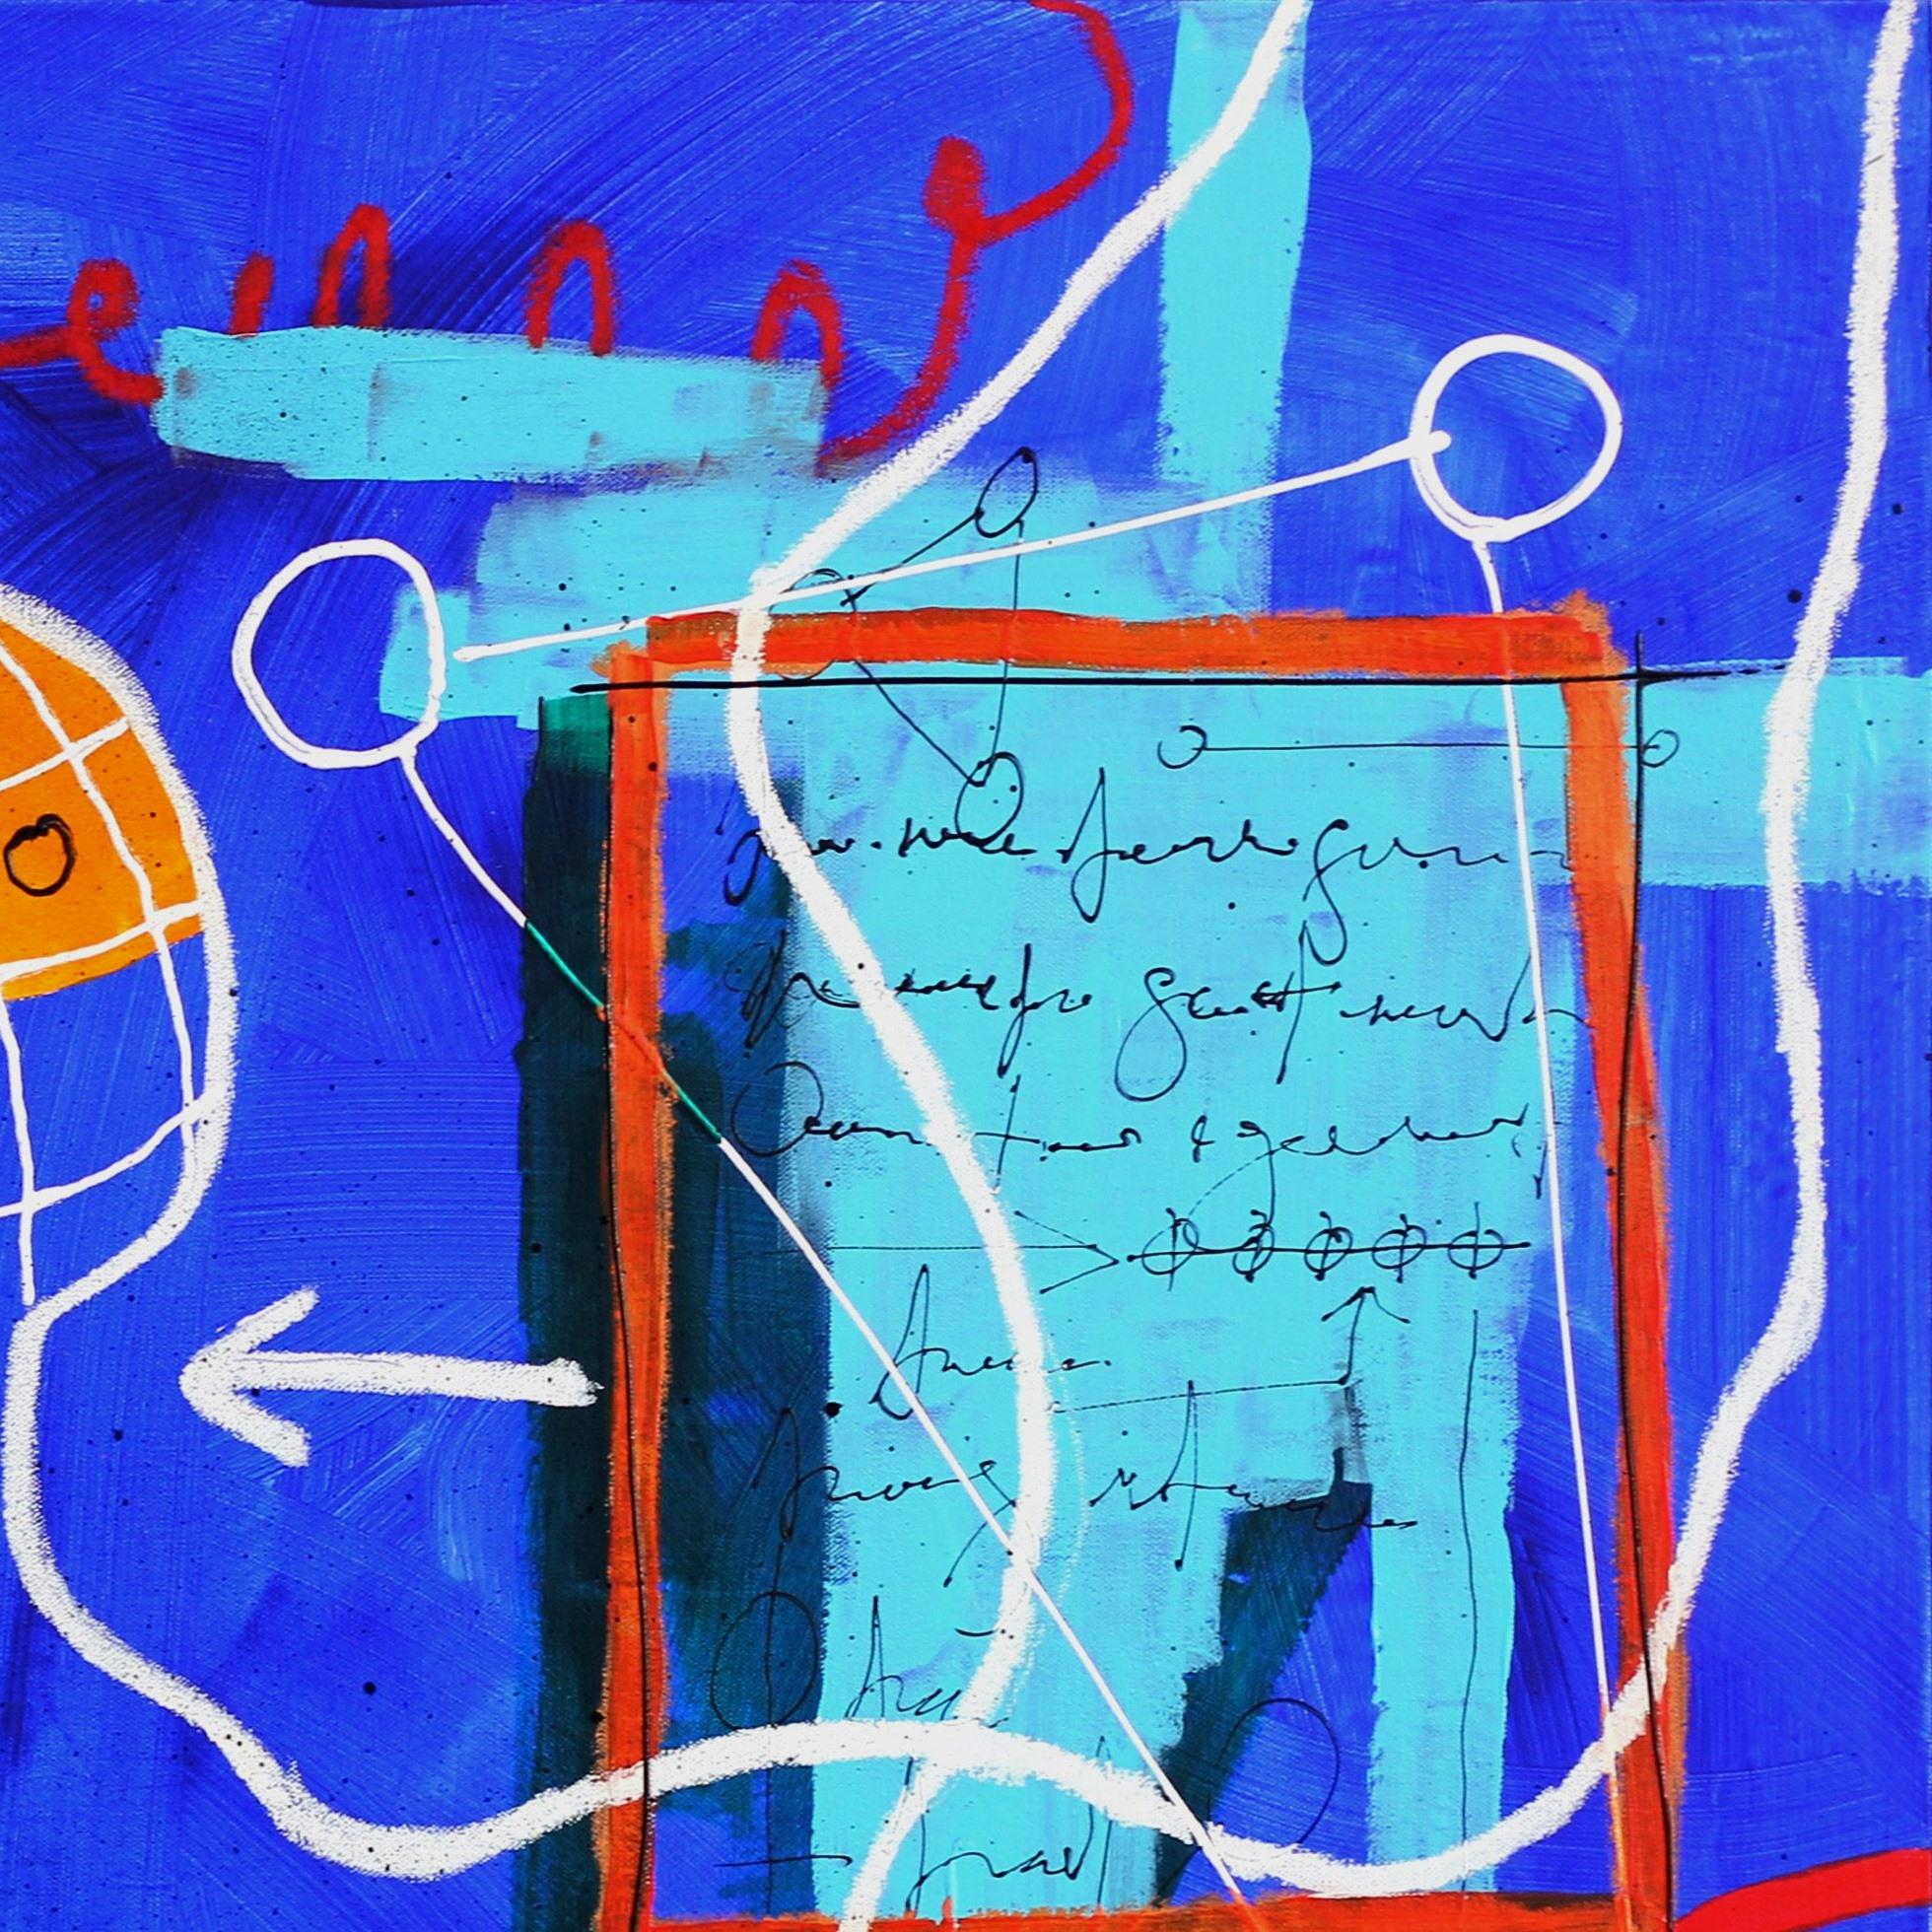 When The Going Gets Tough - Blue Abstract Painting by Soren Grau